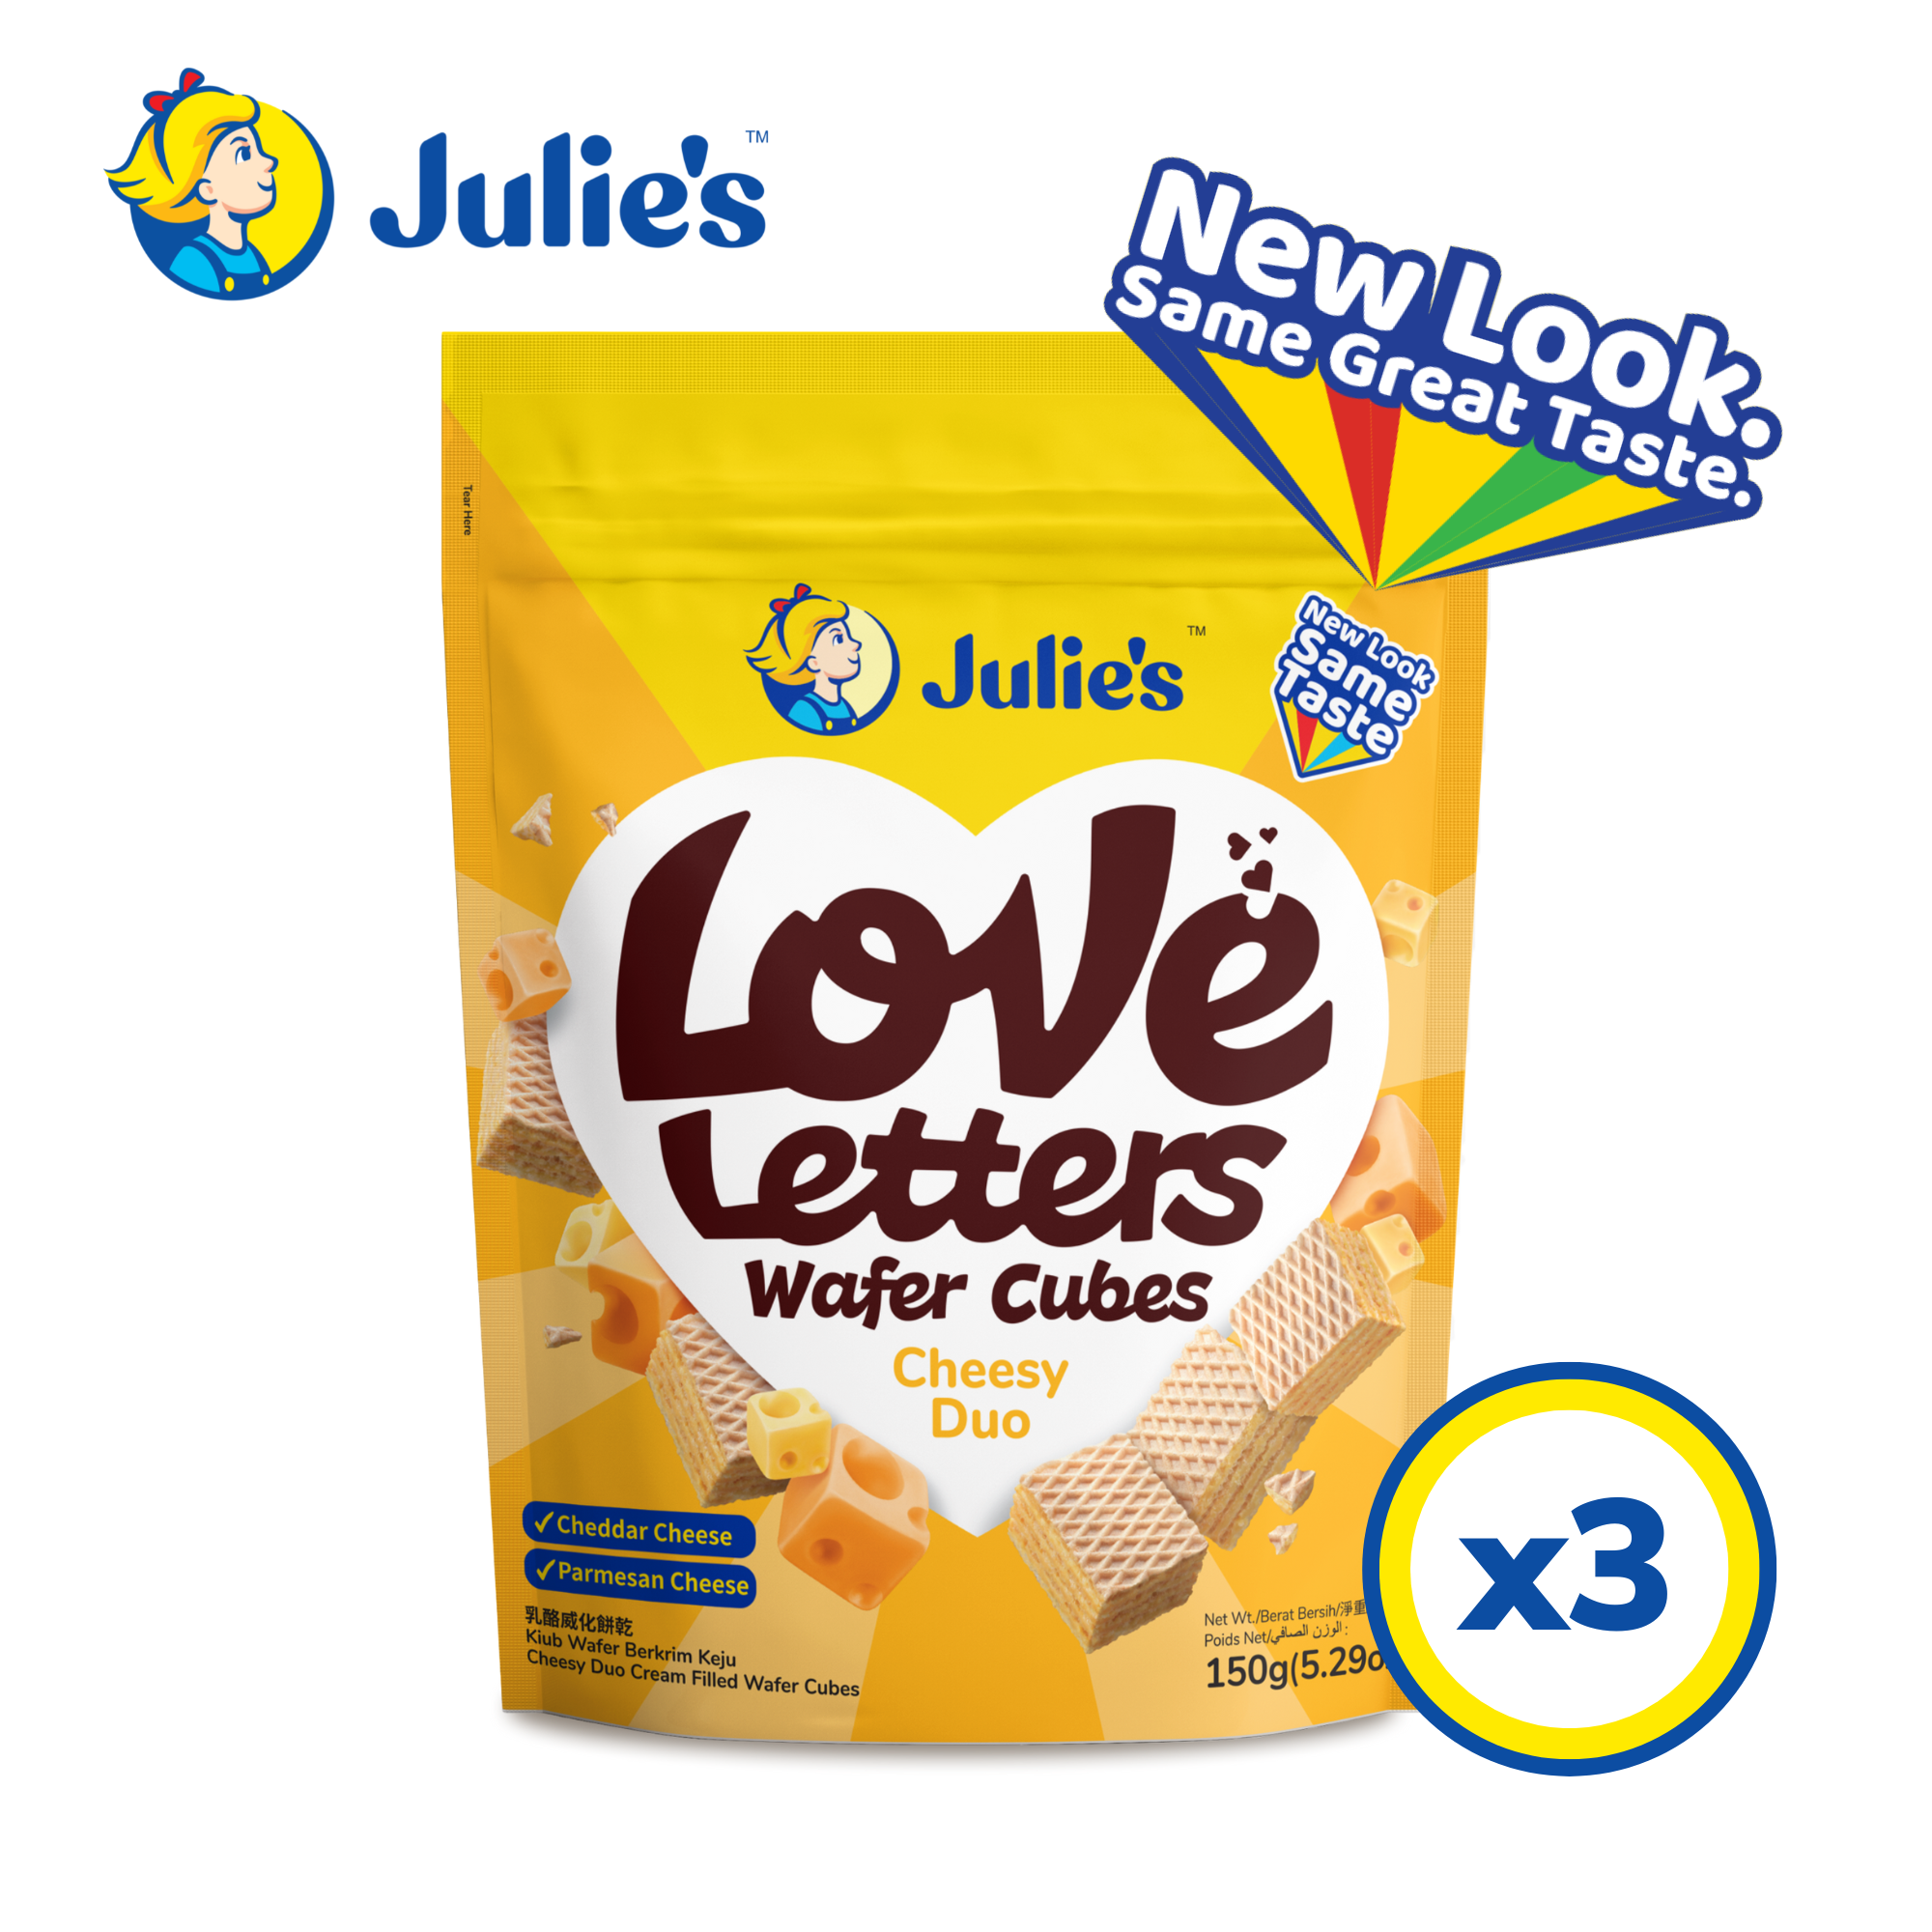 Julie’s Love Letters Wafers Cheesy Duo 150g x 3 packs